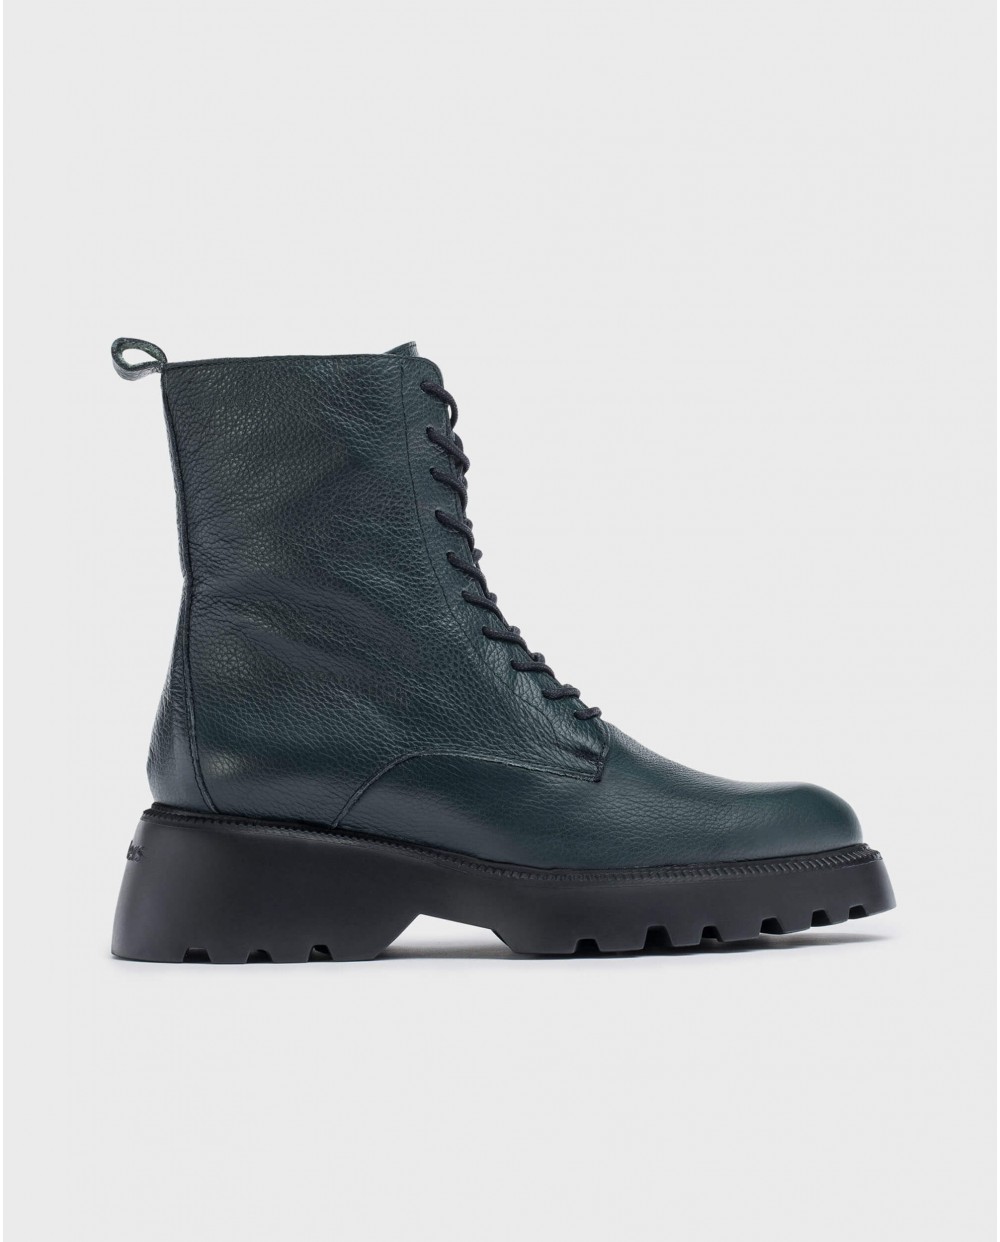 Wonders-Ankle Boots-Green leather ATARI ankle boot